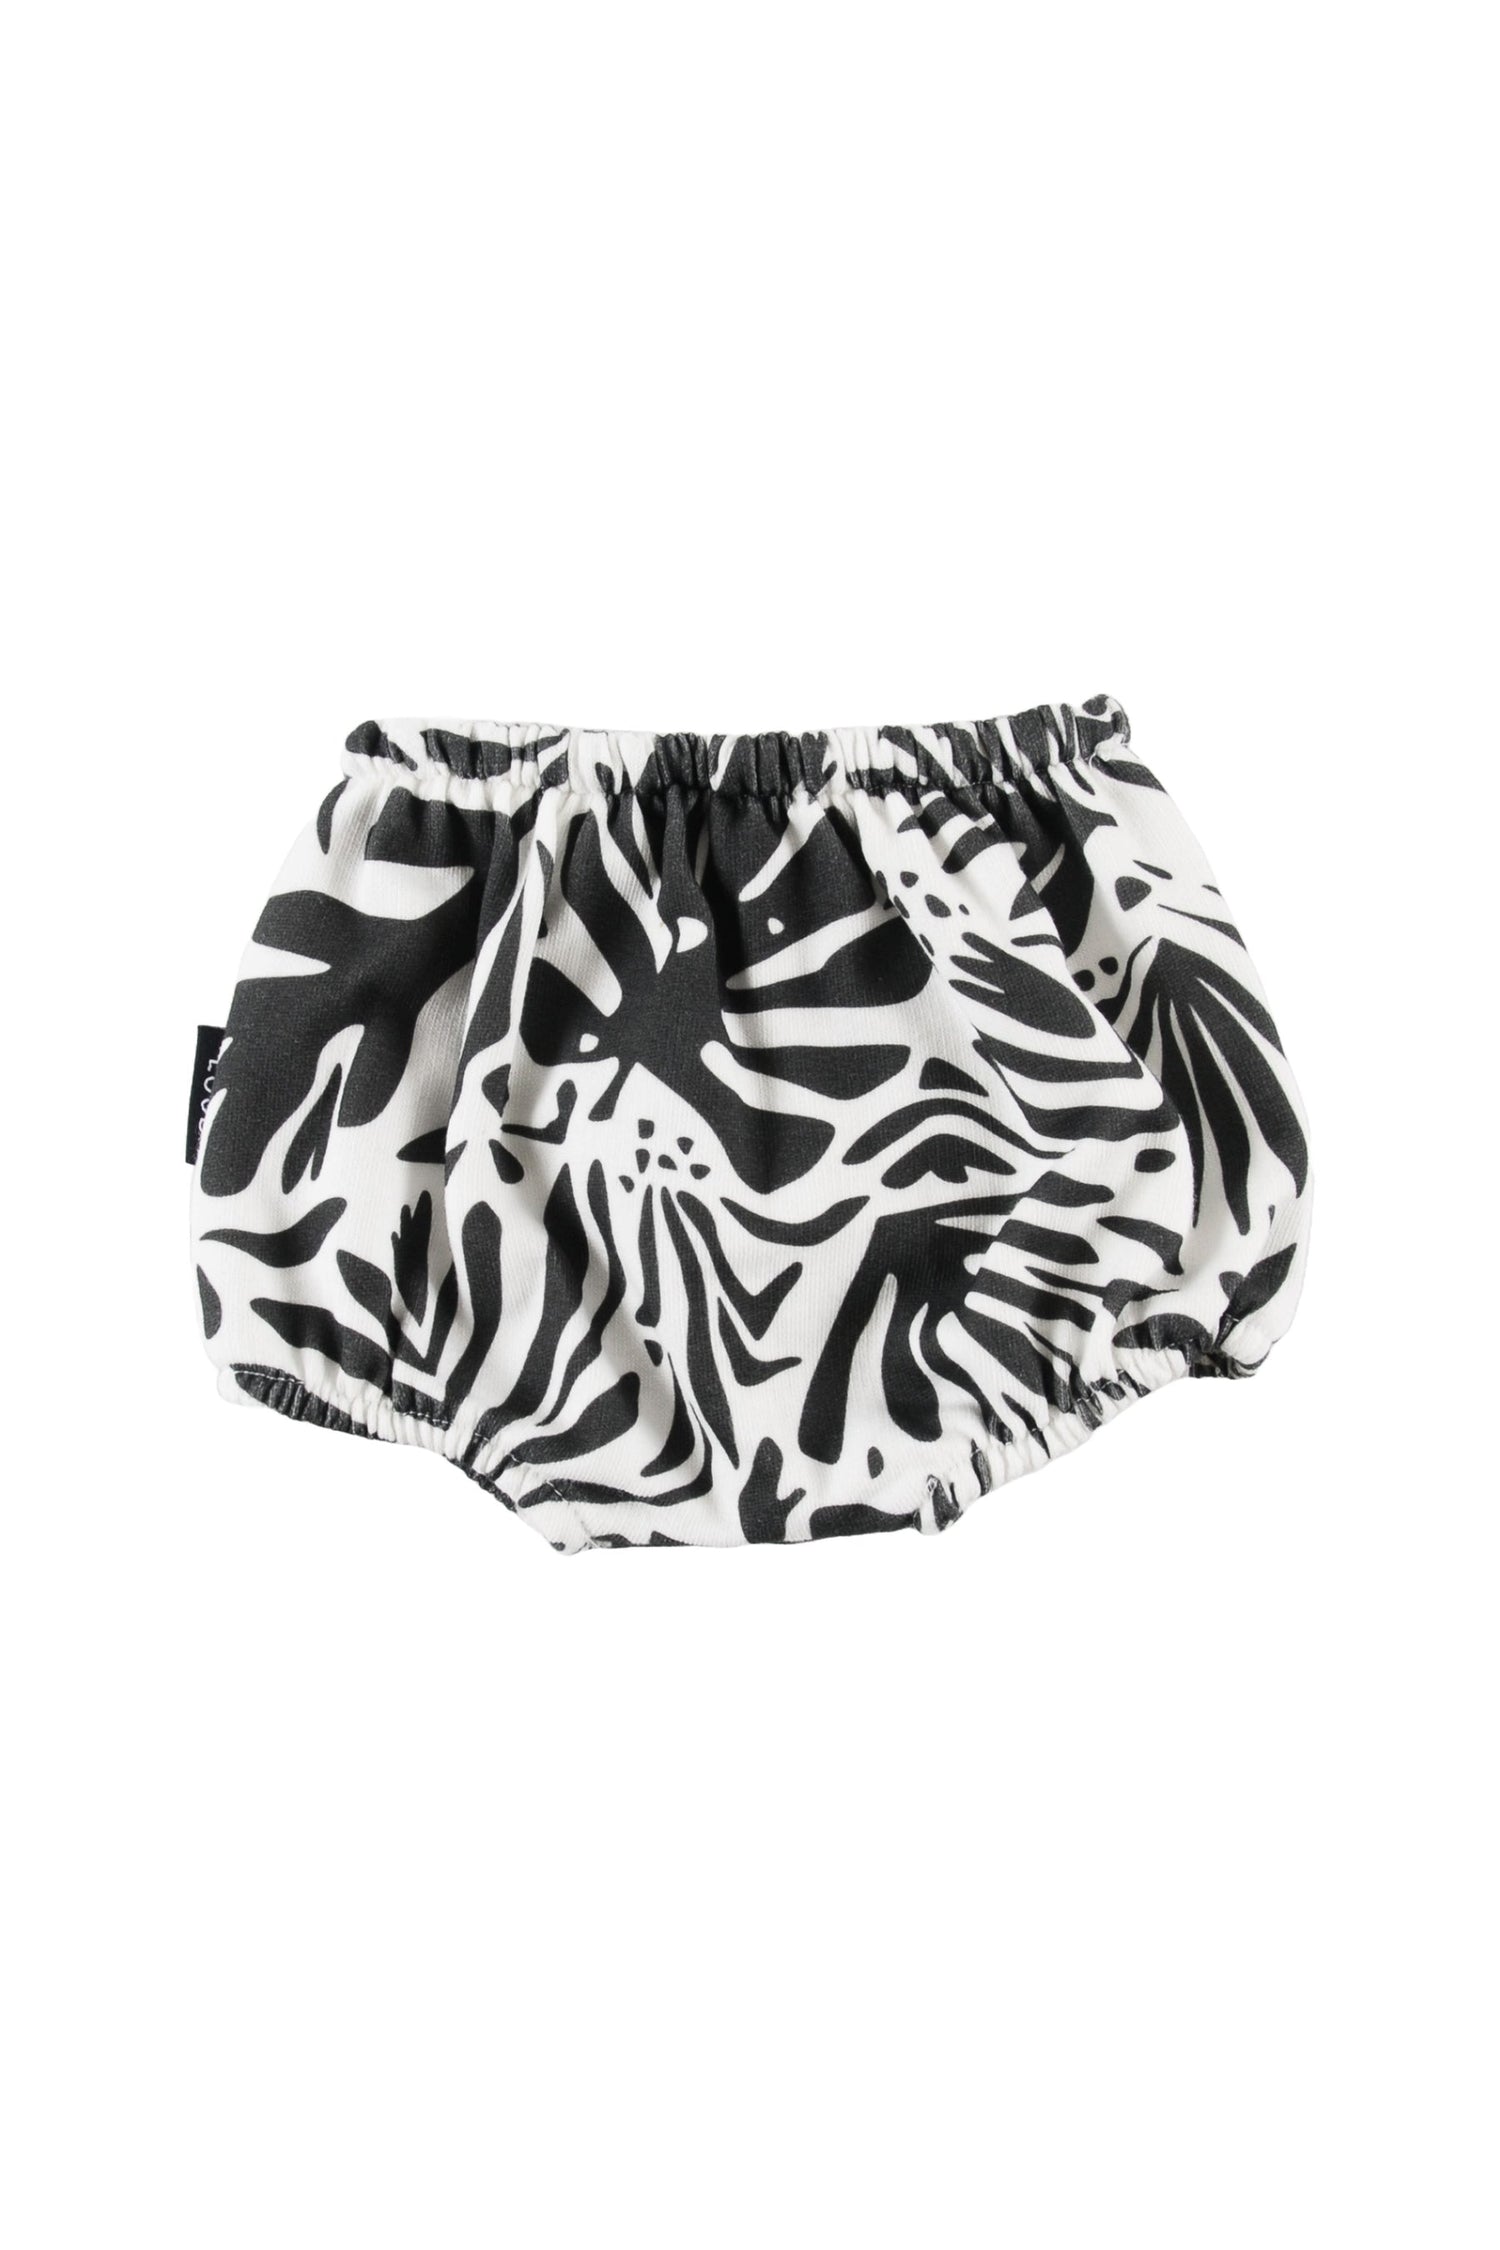 Loud Apparel Black and White Floral Abstract Mememele Bloomers